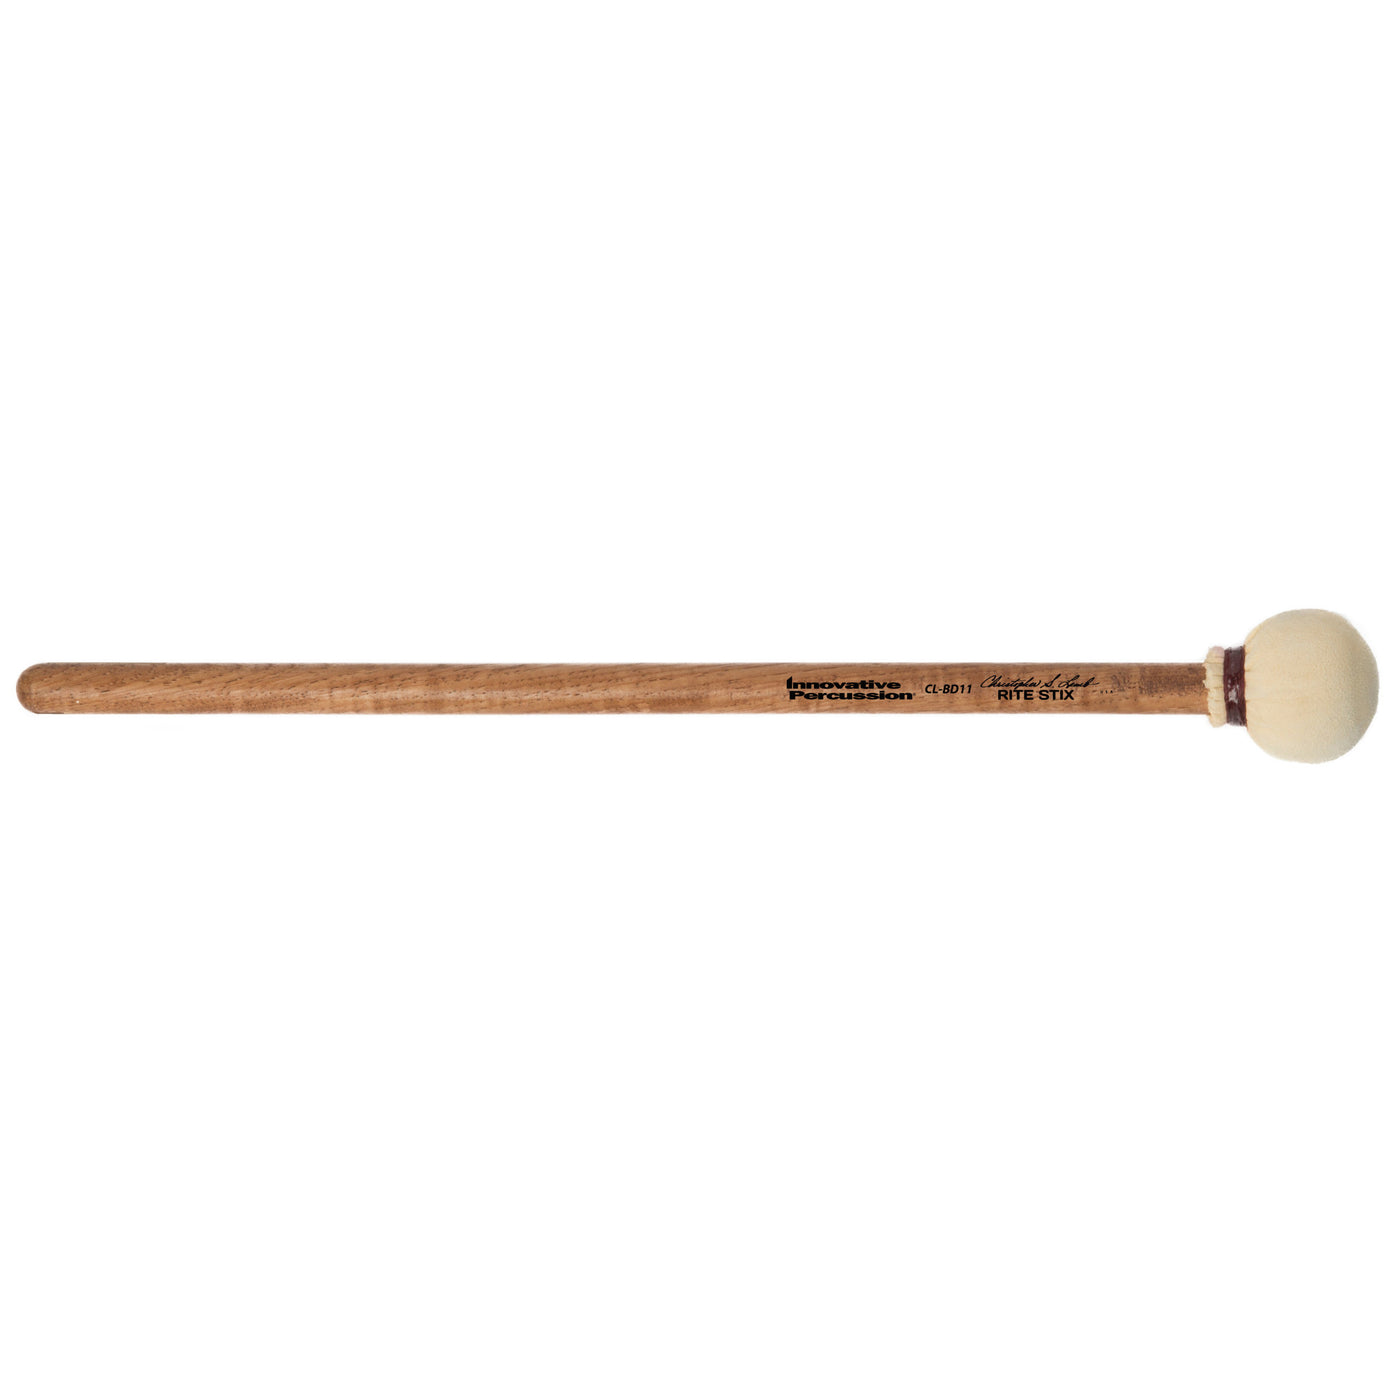 Innovative Percussion CL-BD11 Drum Mallet